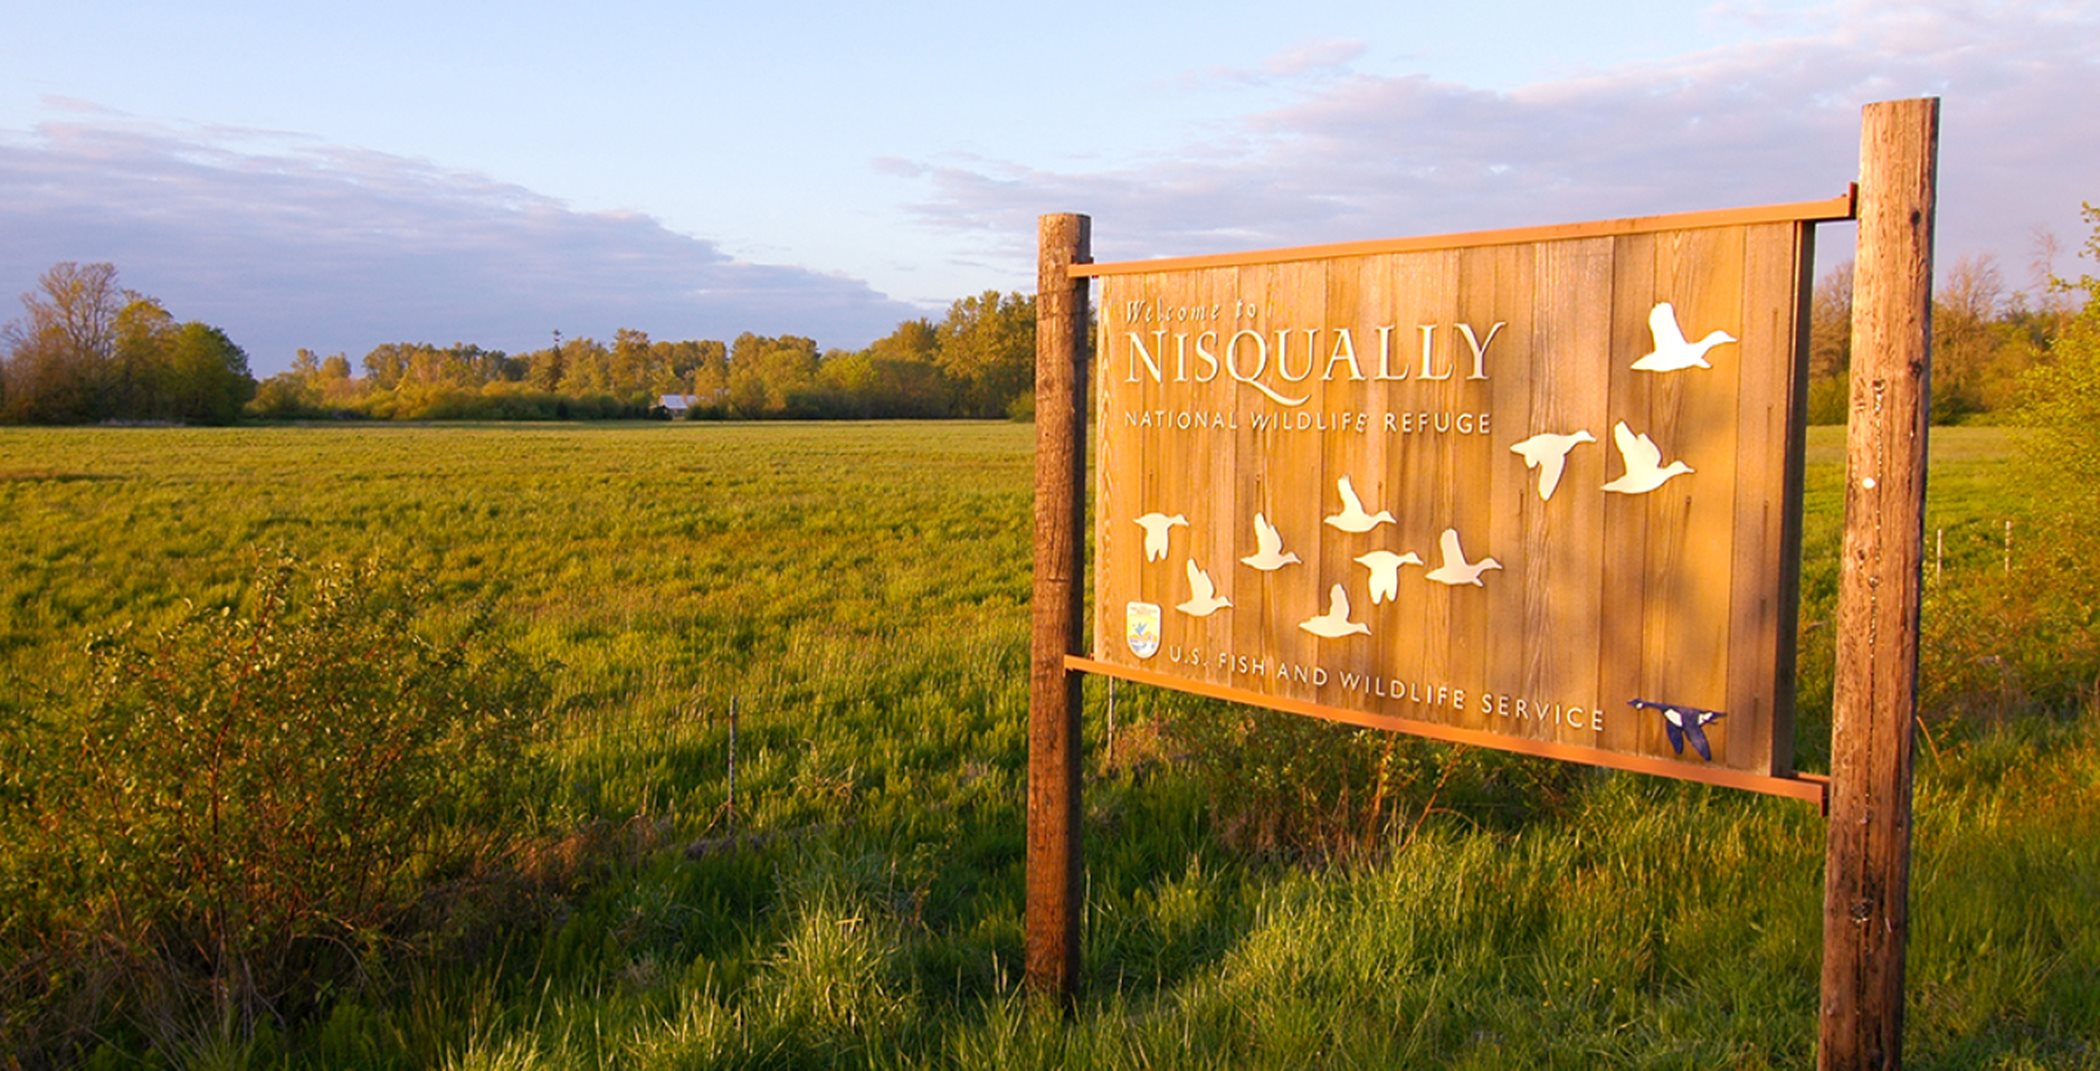 Nisqually Wildlife Sign in a grass field